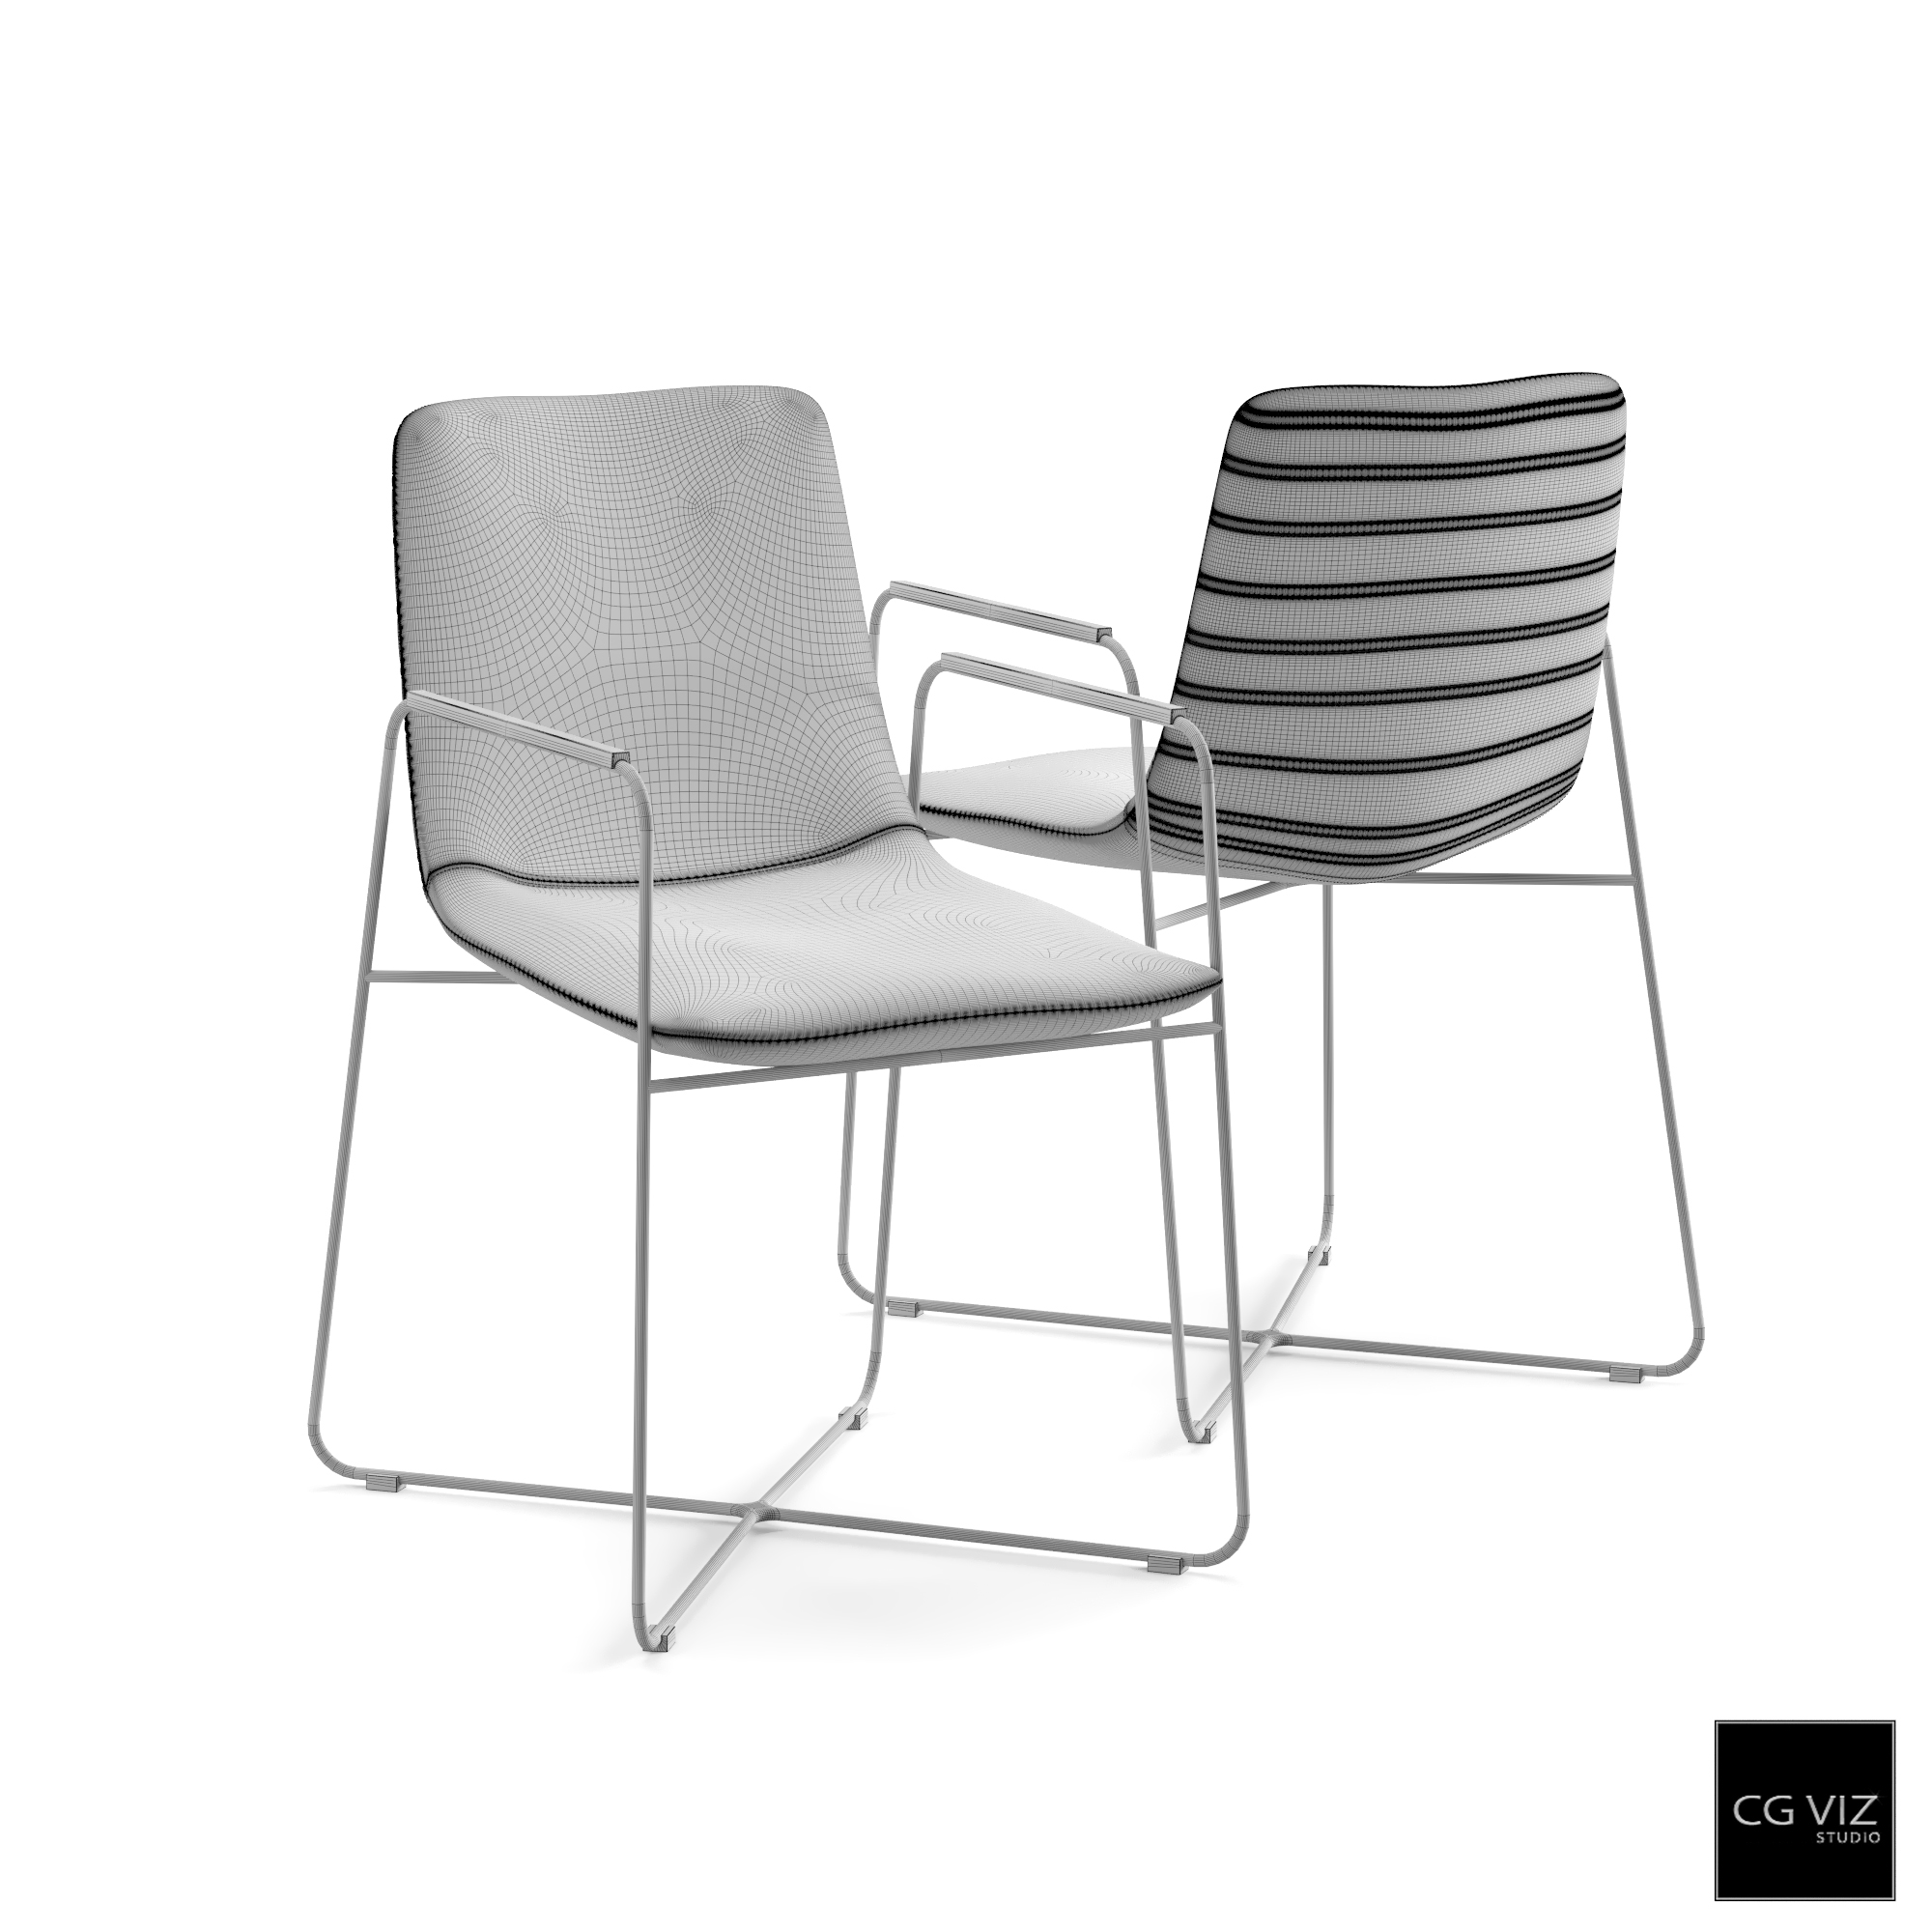 Wireframe View of Issue Armchair 3D Model by CG Viz Studio